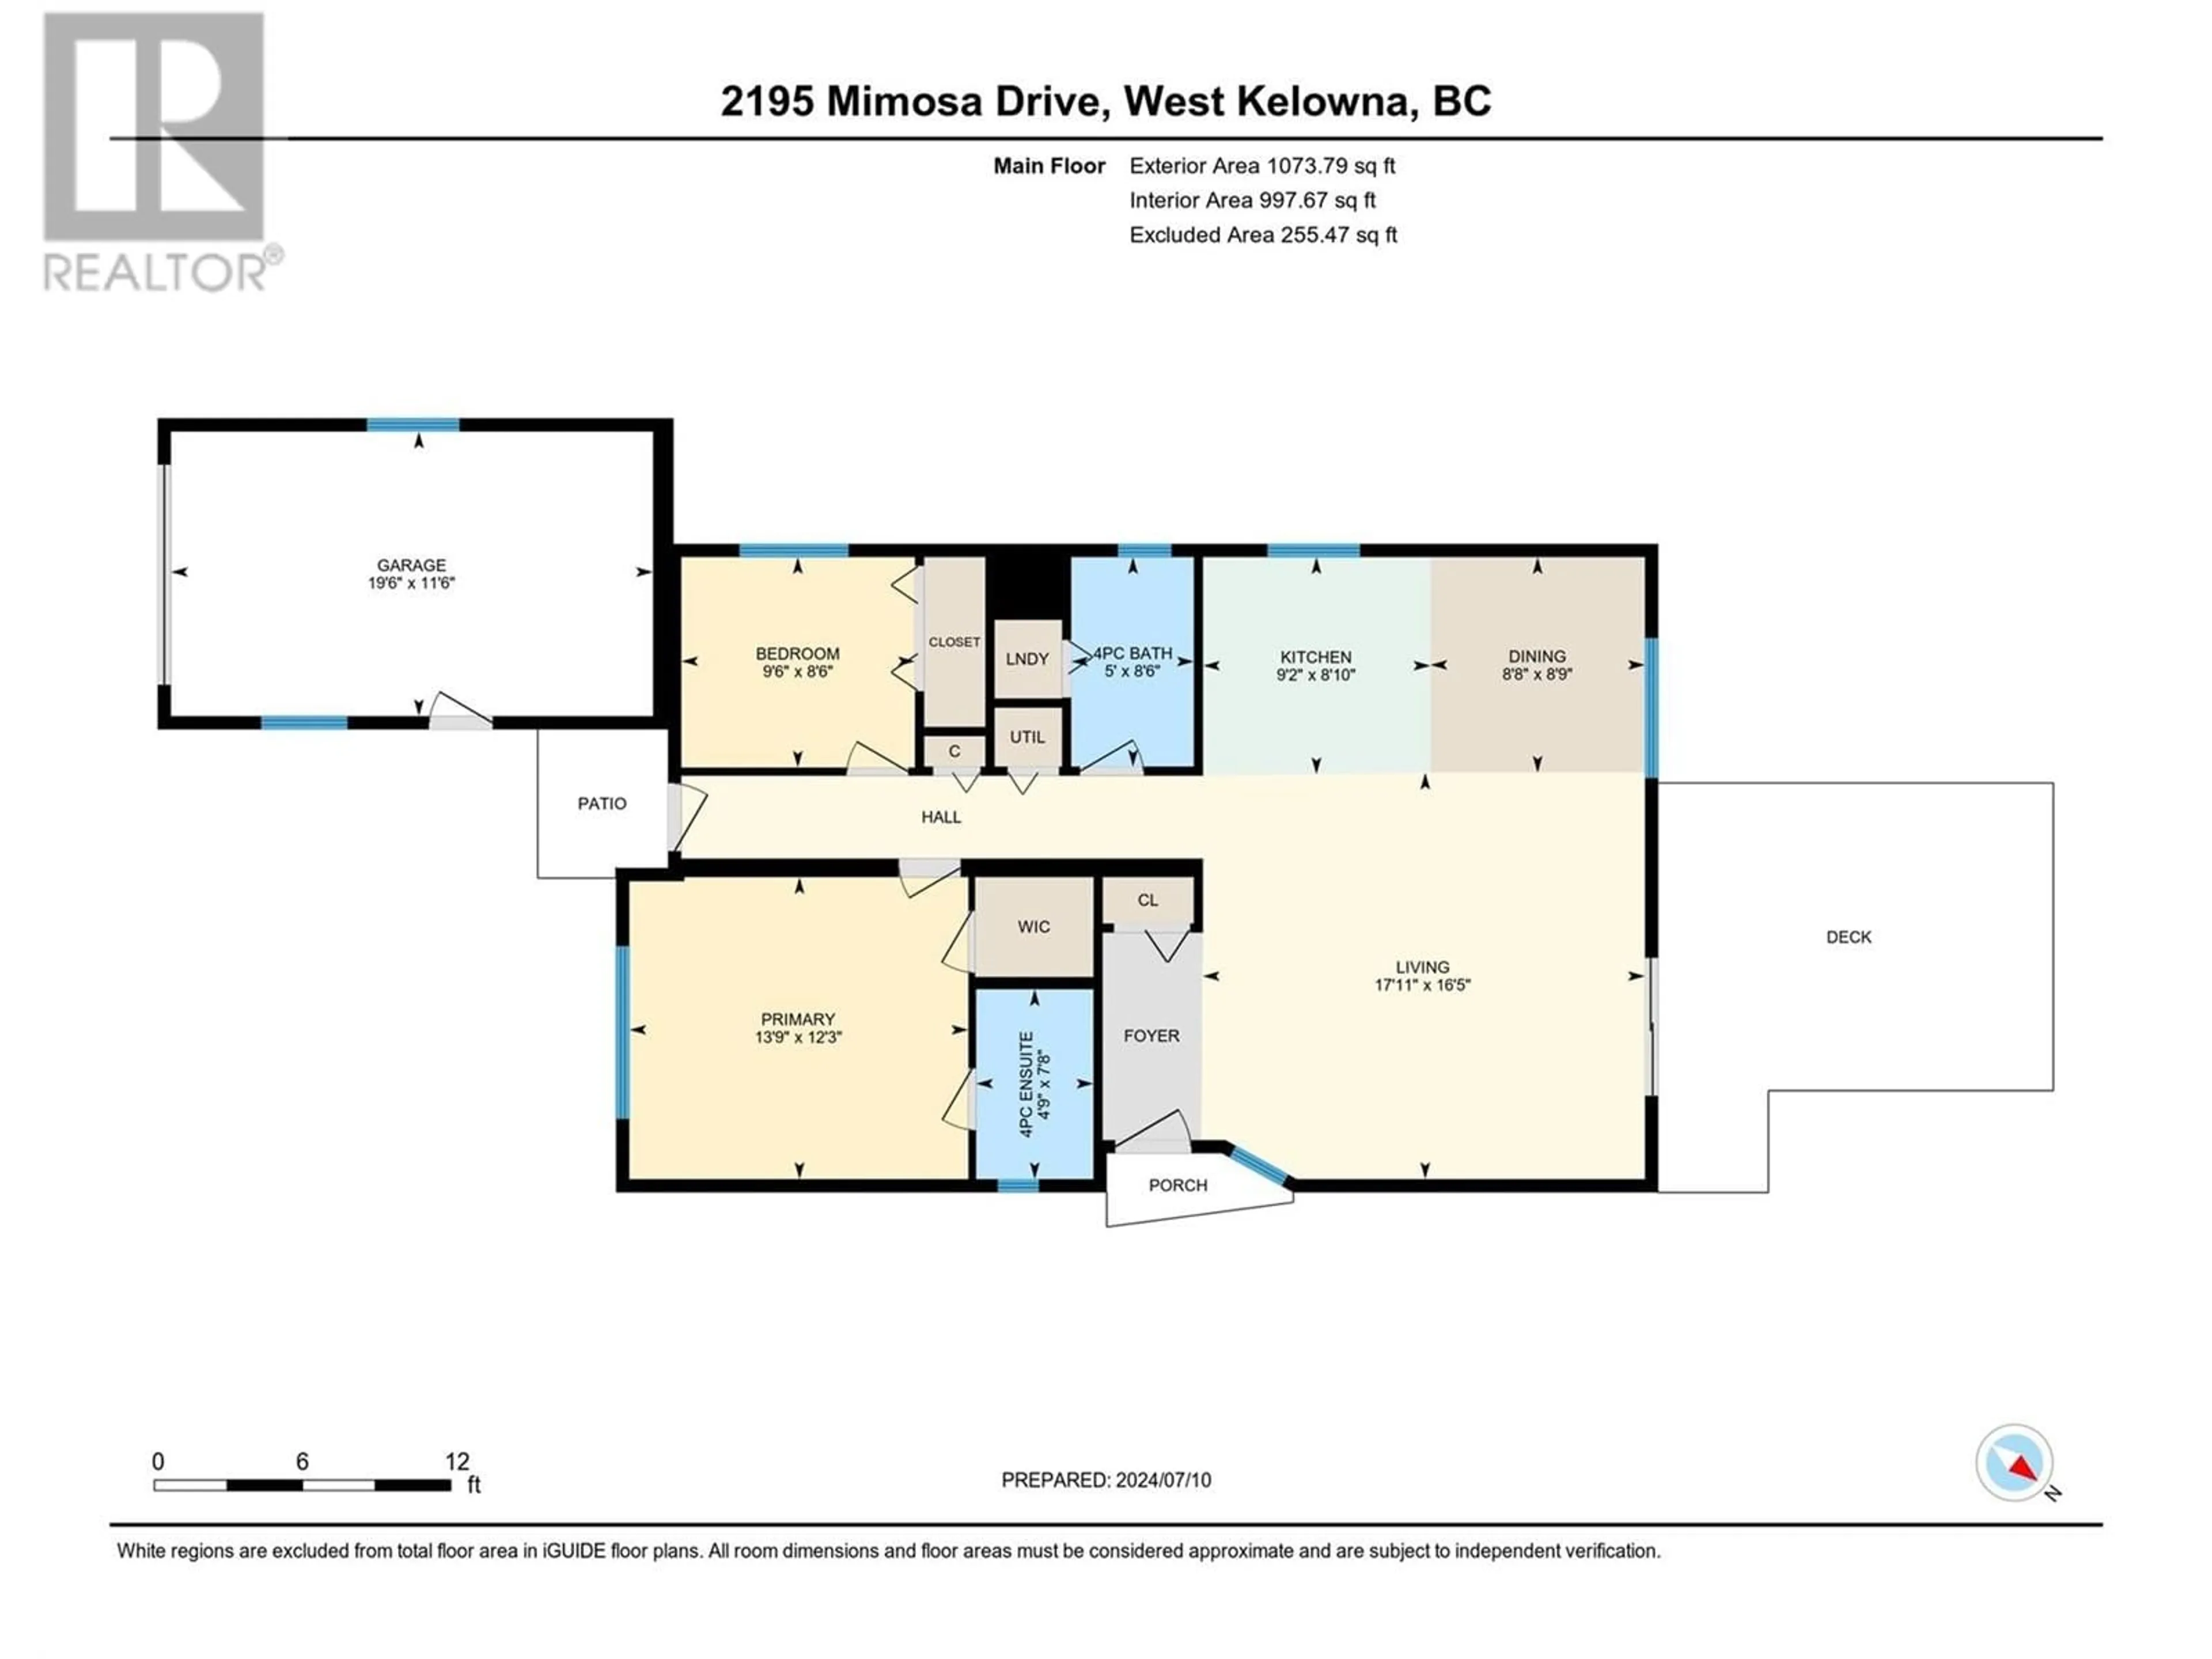 Floor plan for 2195 Mimosa Drive, West Kelowna British Columbia V4T3A5